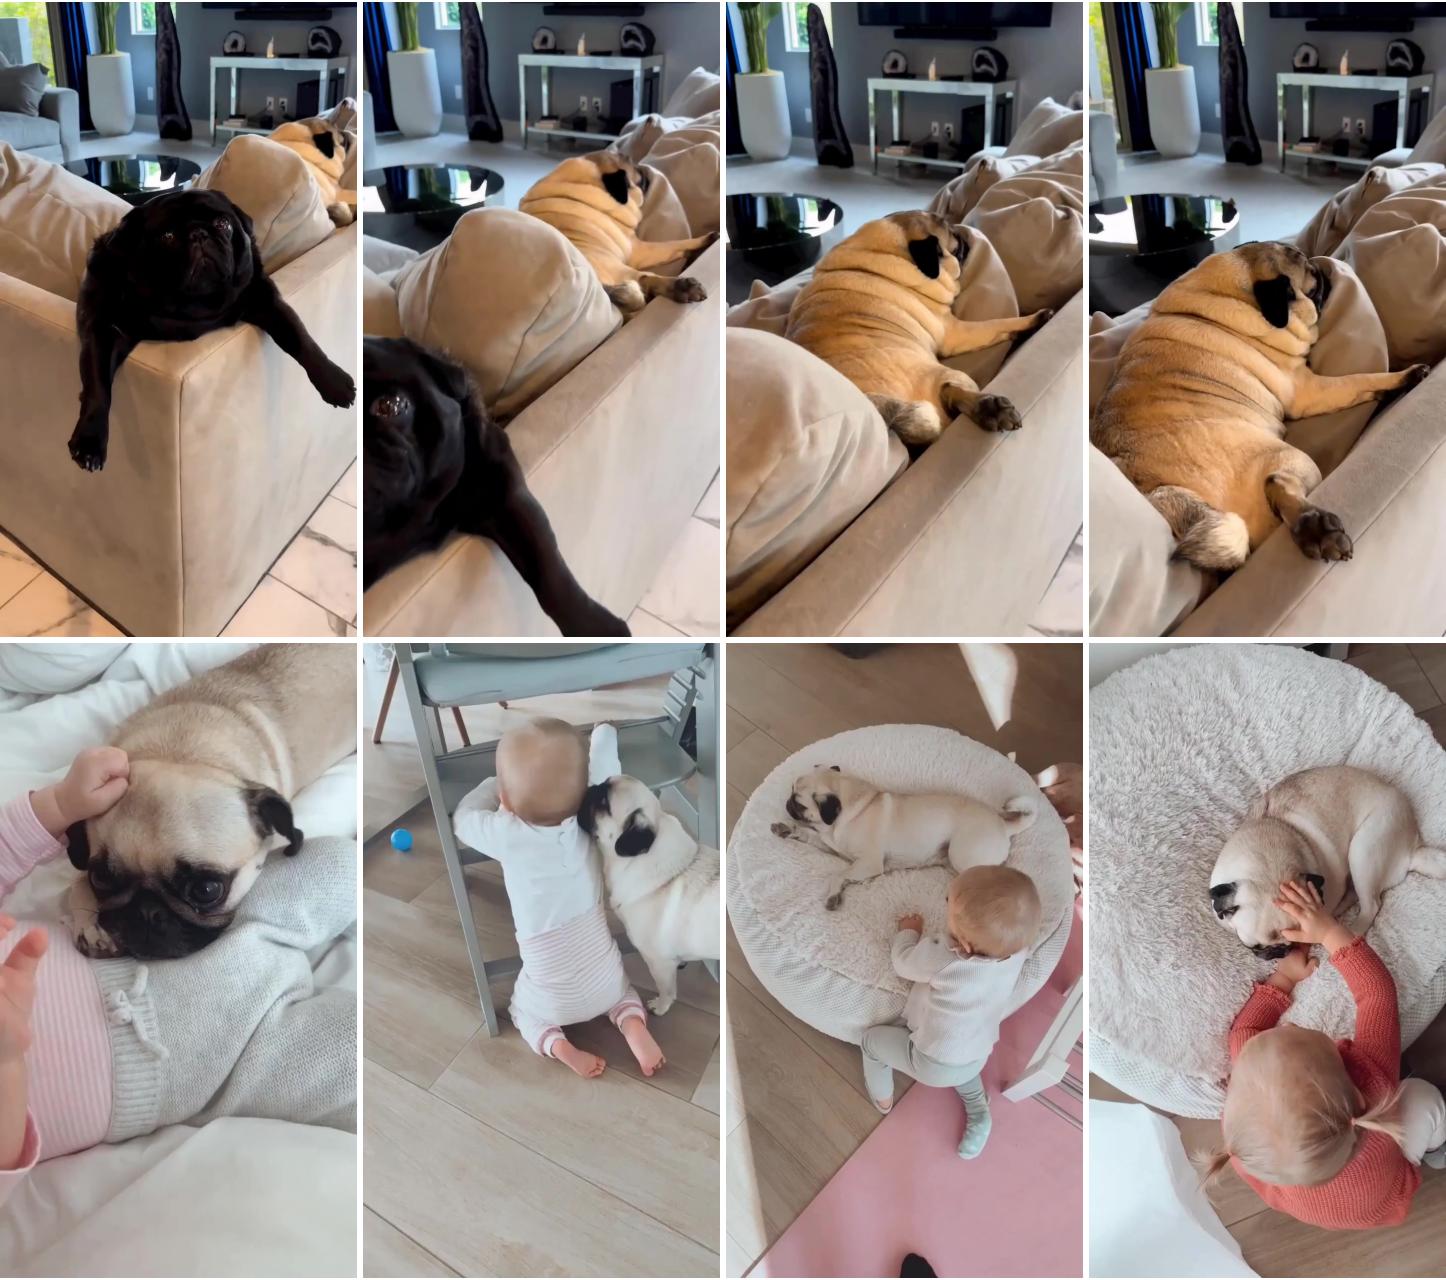 Adorable cute pug puppies video ; the dog has been with her since she was born  pug lover